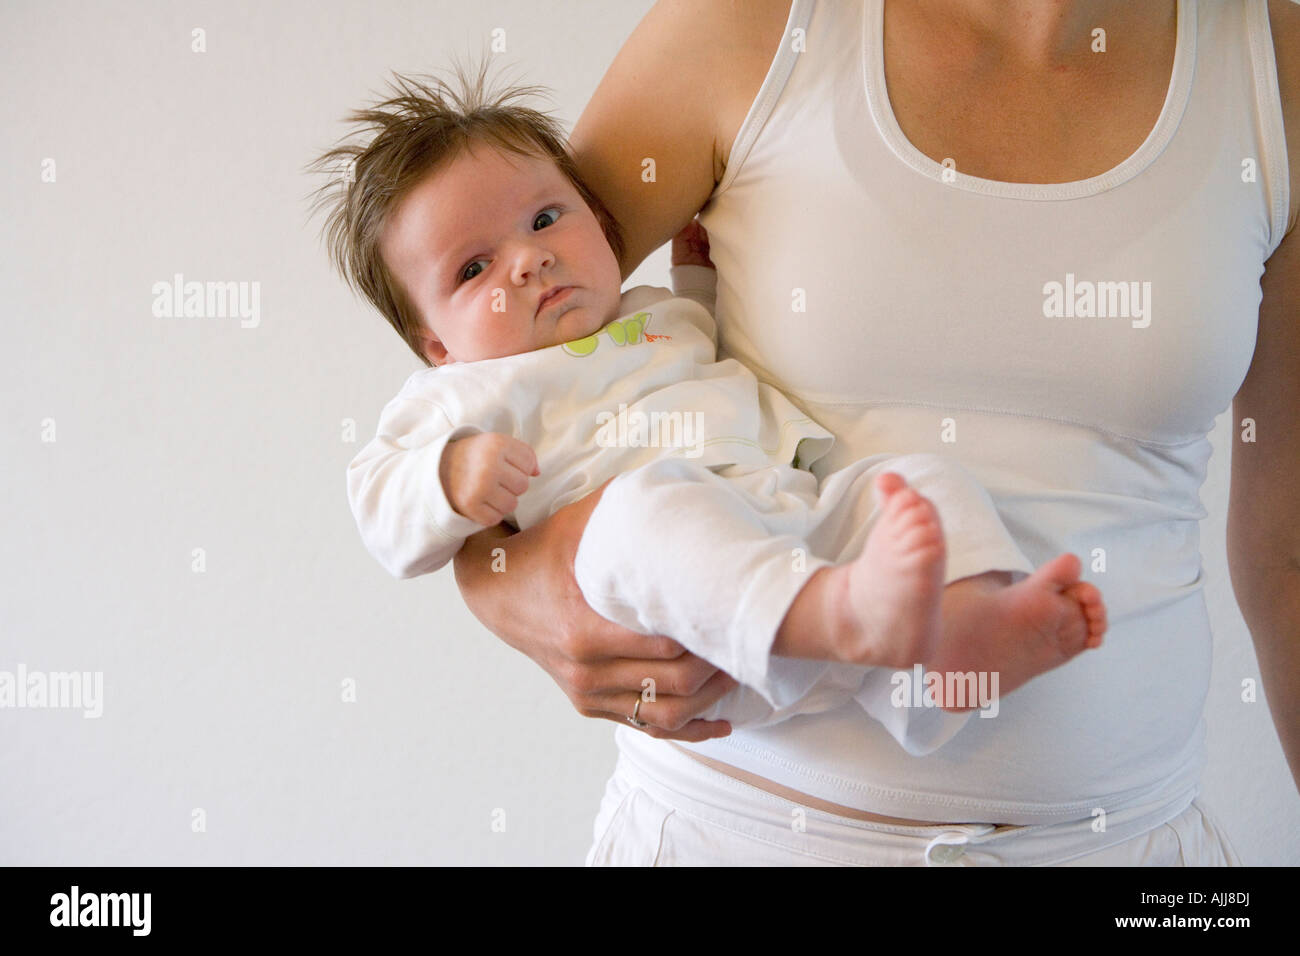 Baby With A Lot Of Hair On His Mothers Arm Stock Photo Royalty